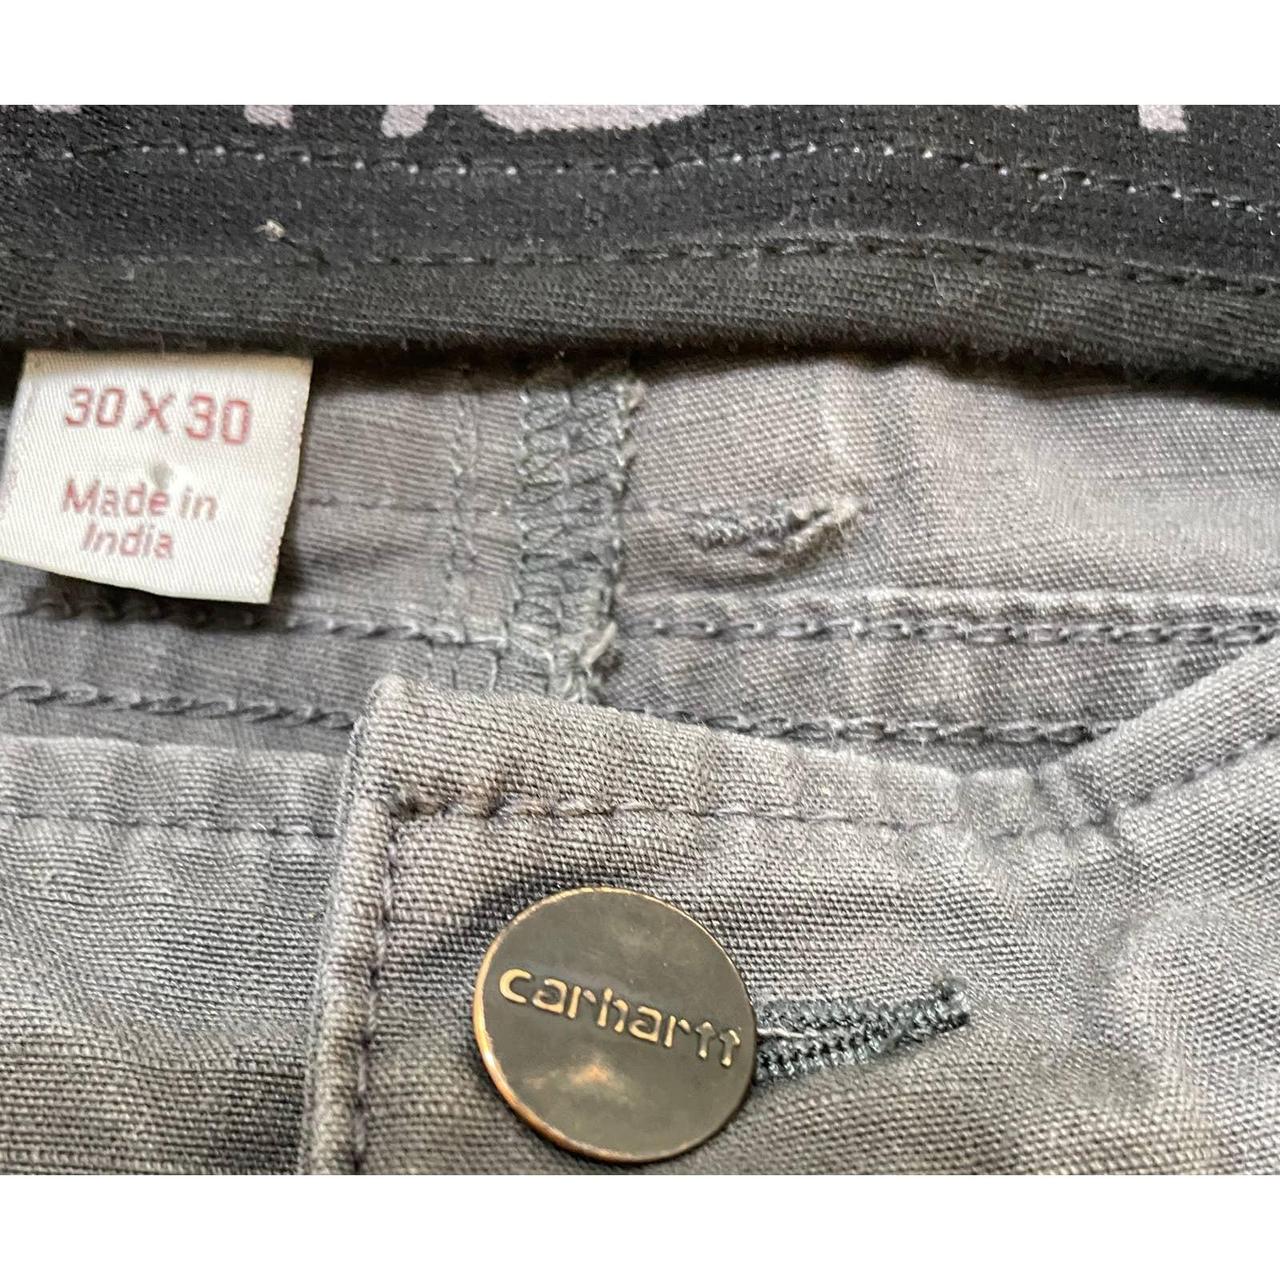 Carhartt Pants Mens 30x30 Stretch Relaxed Fit Double - Depop